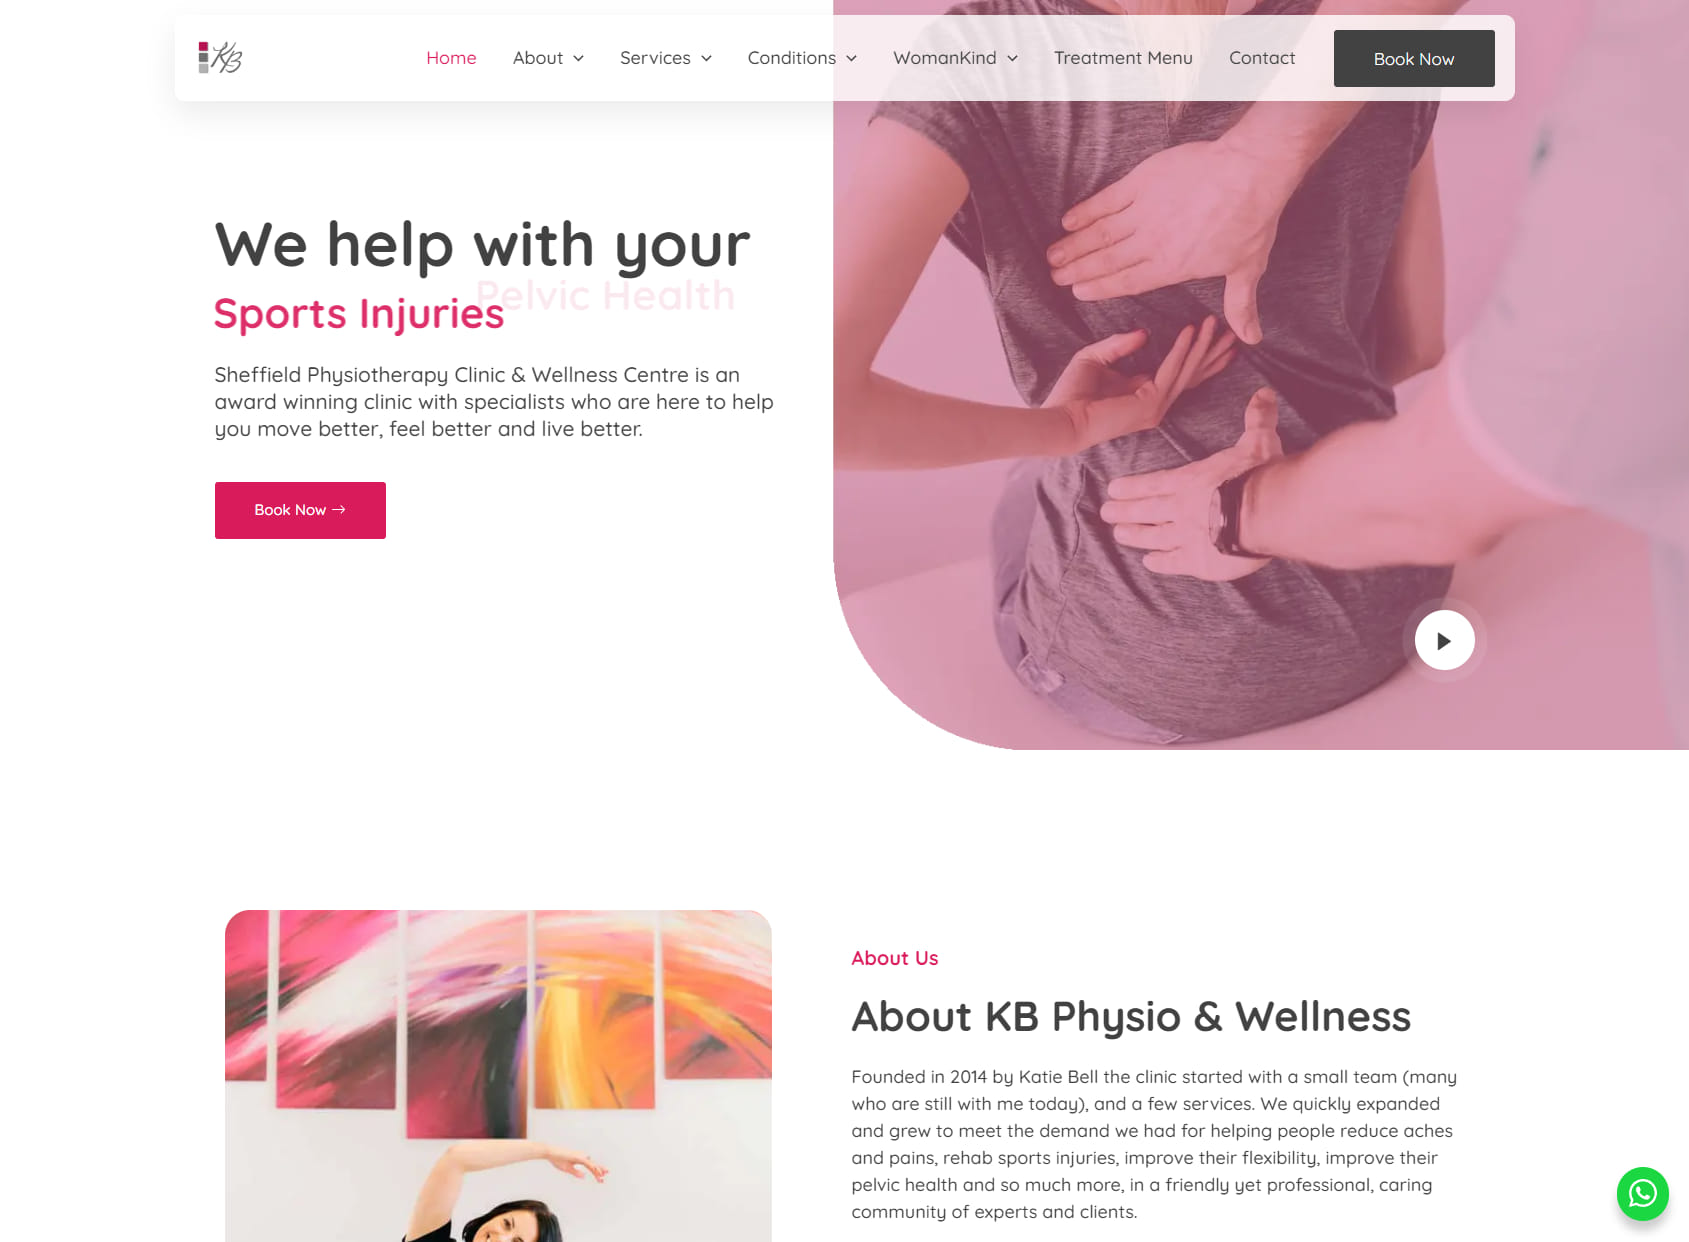 Katie Bell Physiotherapy & Wellness